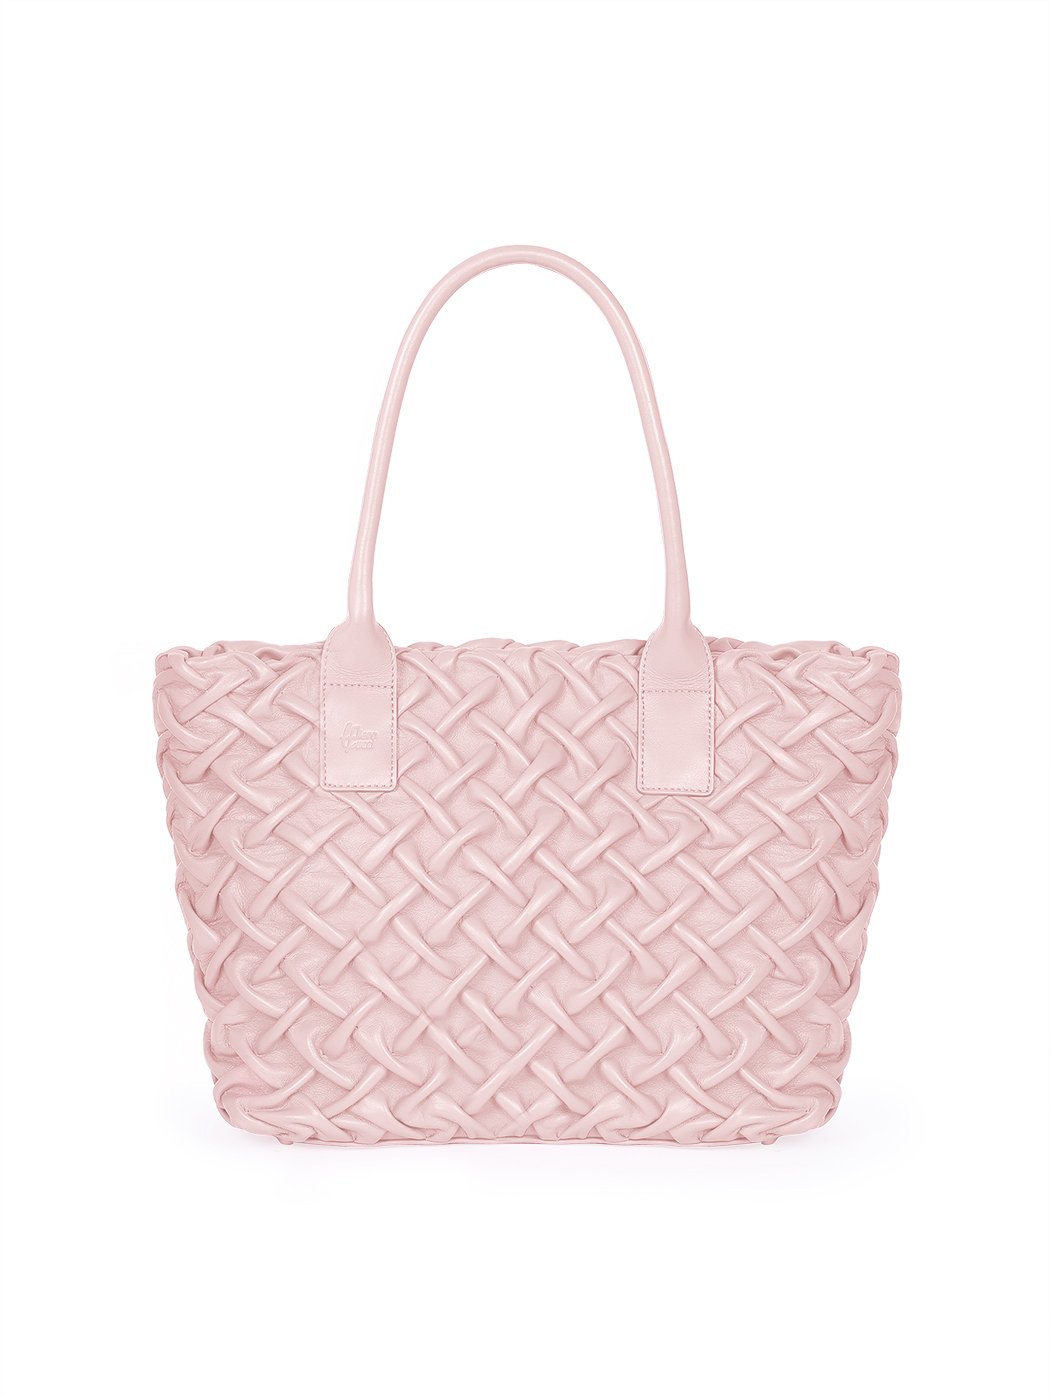 Quilted Weave Leather Satchel Tote Bag Pink